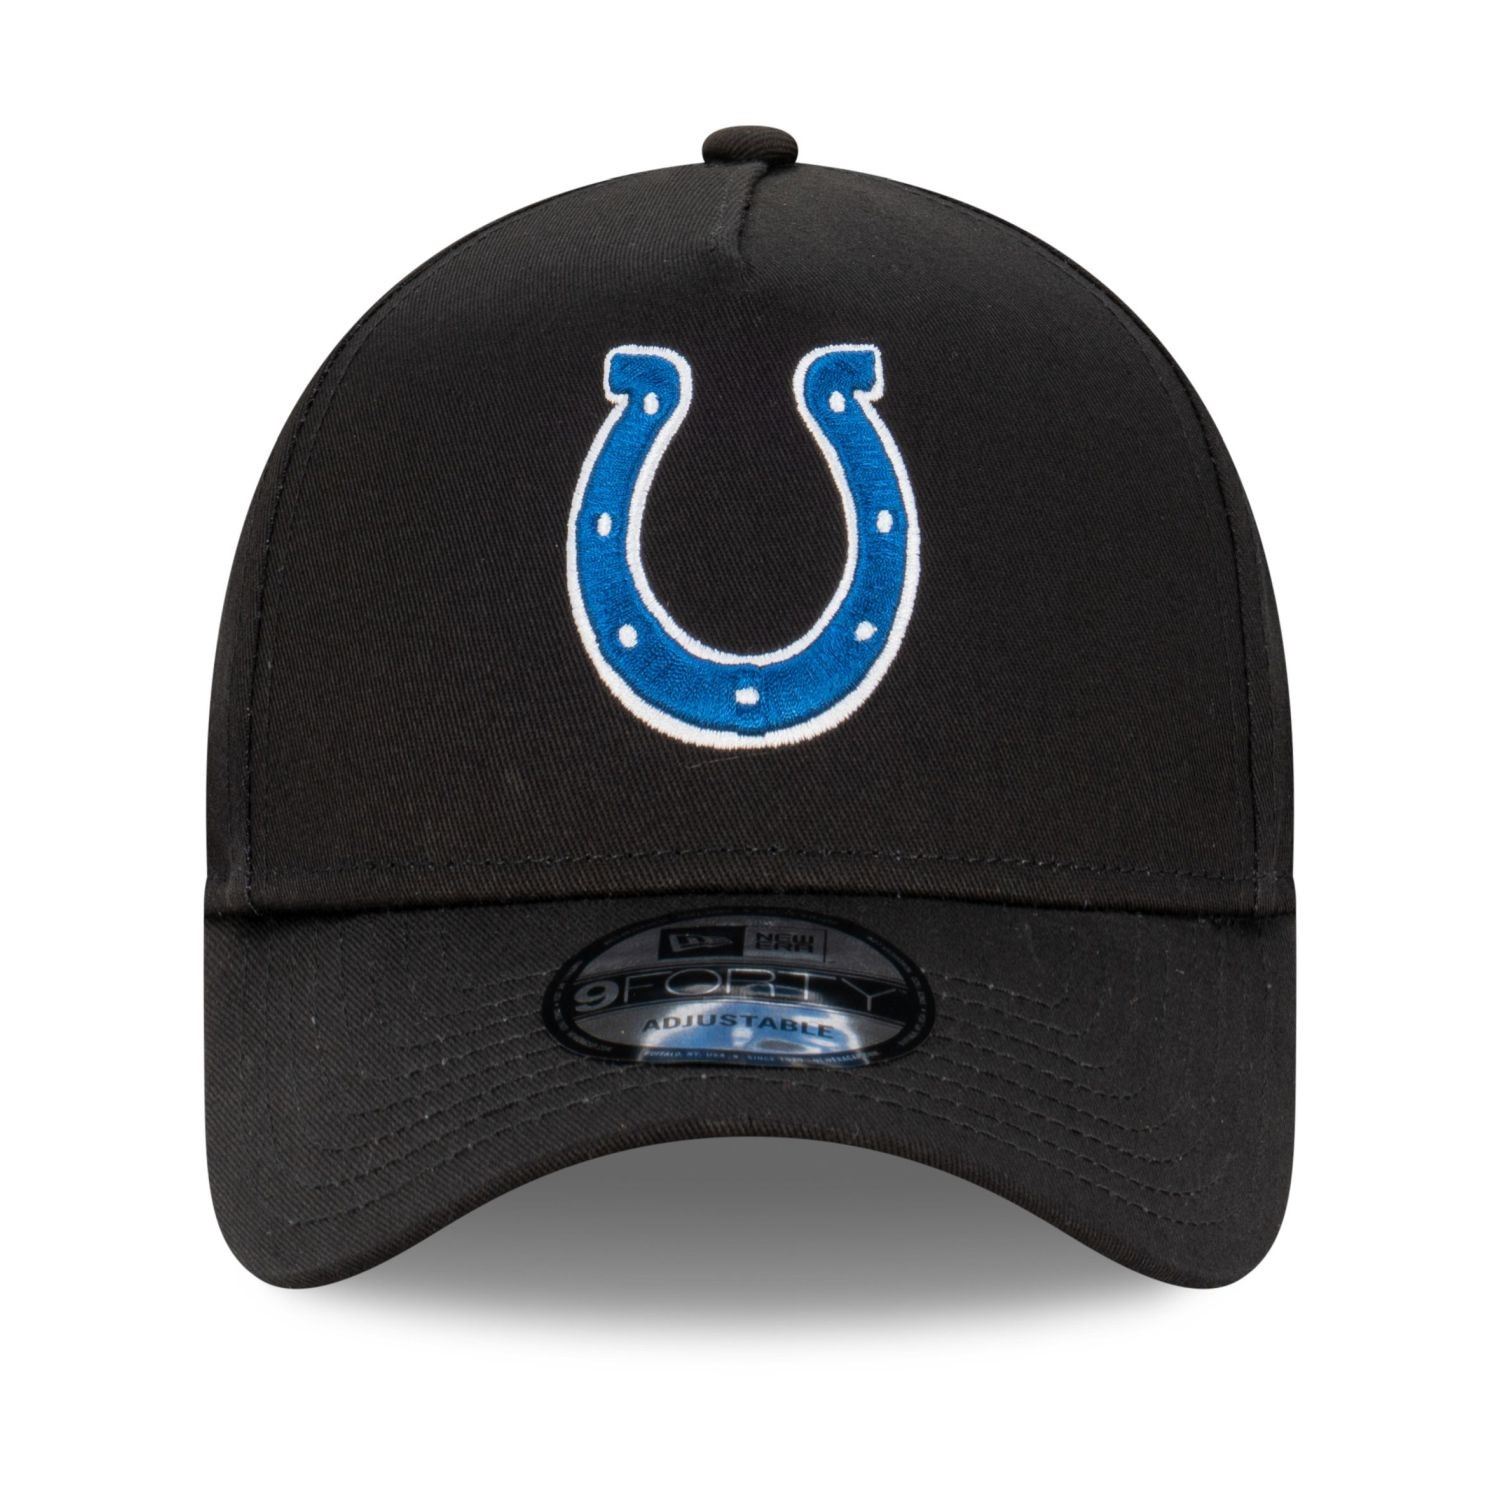 Indianapolis Colts NFL Evergreen Black 9Forty Adjustable A-Frame Cap New Era